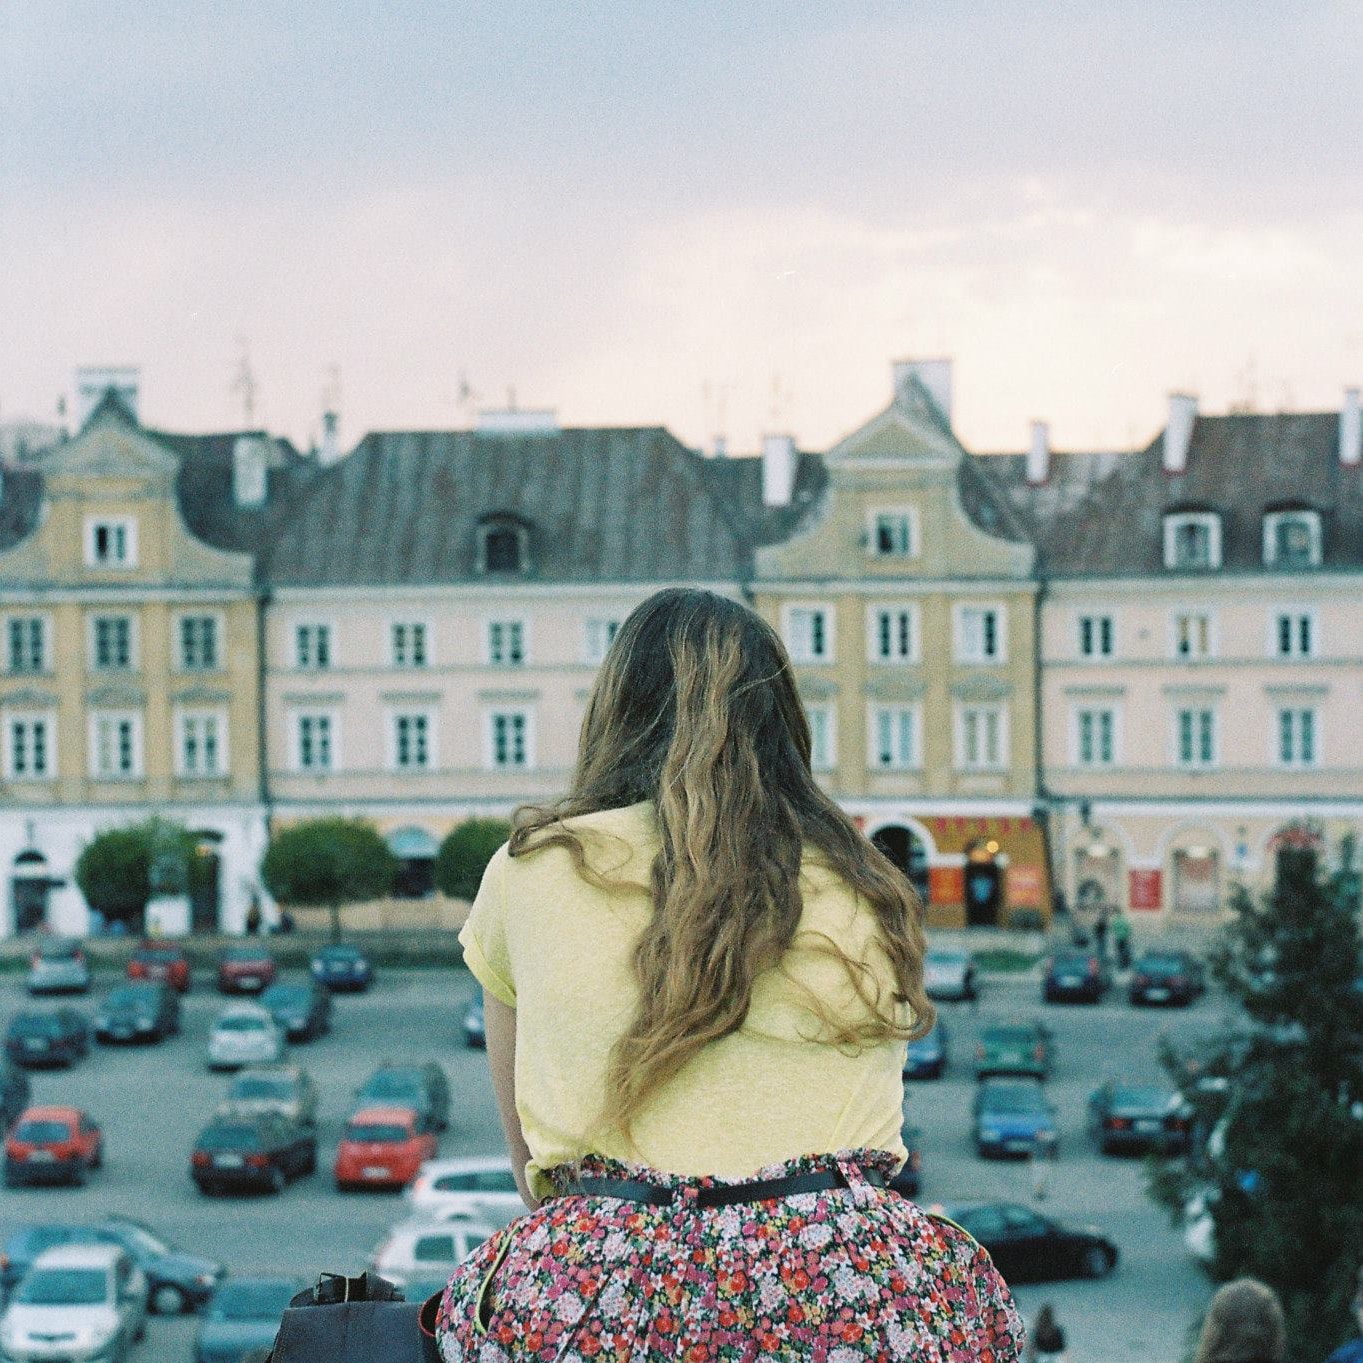 Leticia López Martínez sitting on her back in the open air with houses of the city of Lublin behind